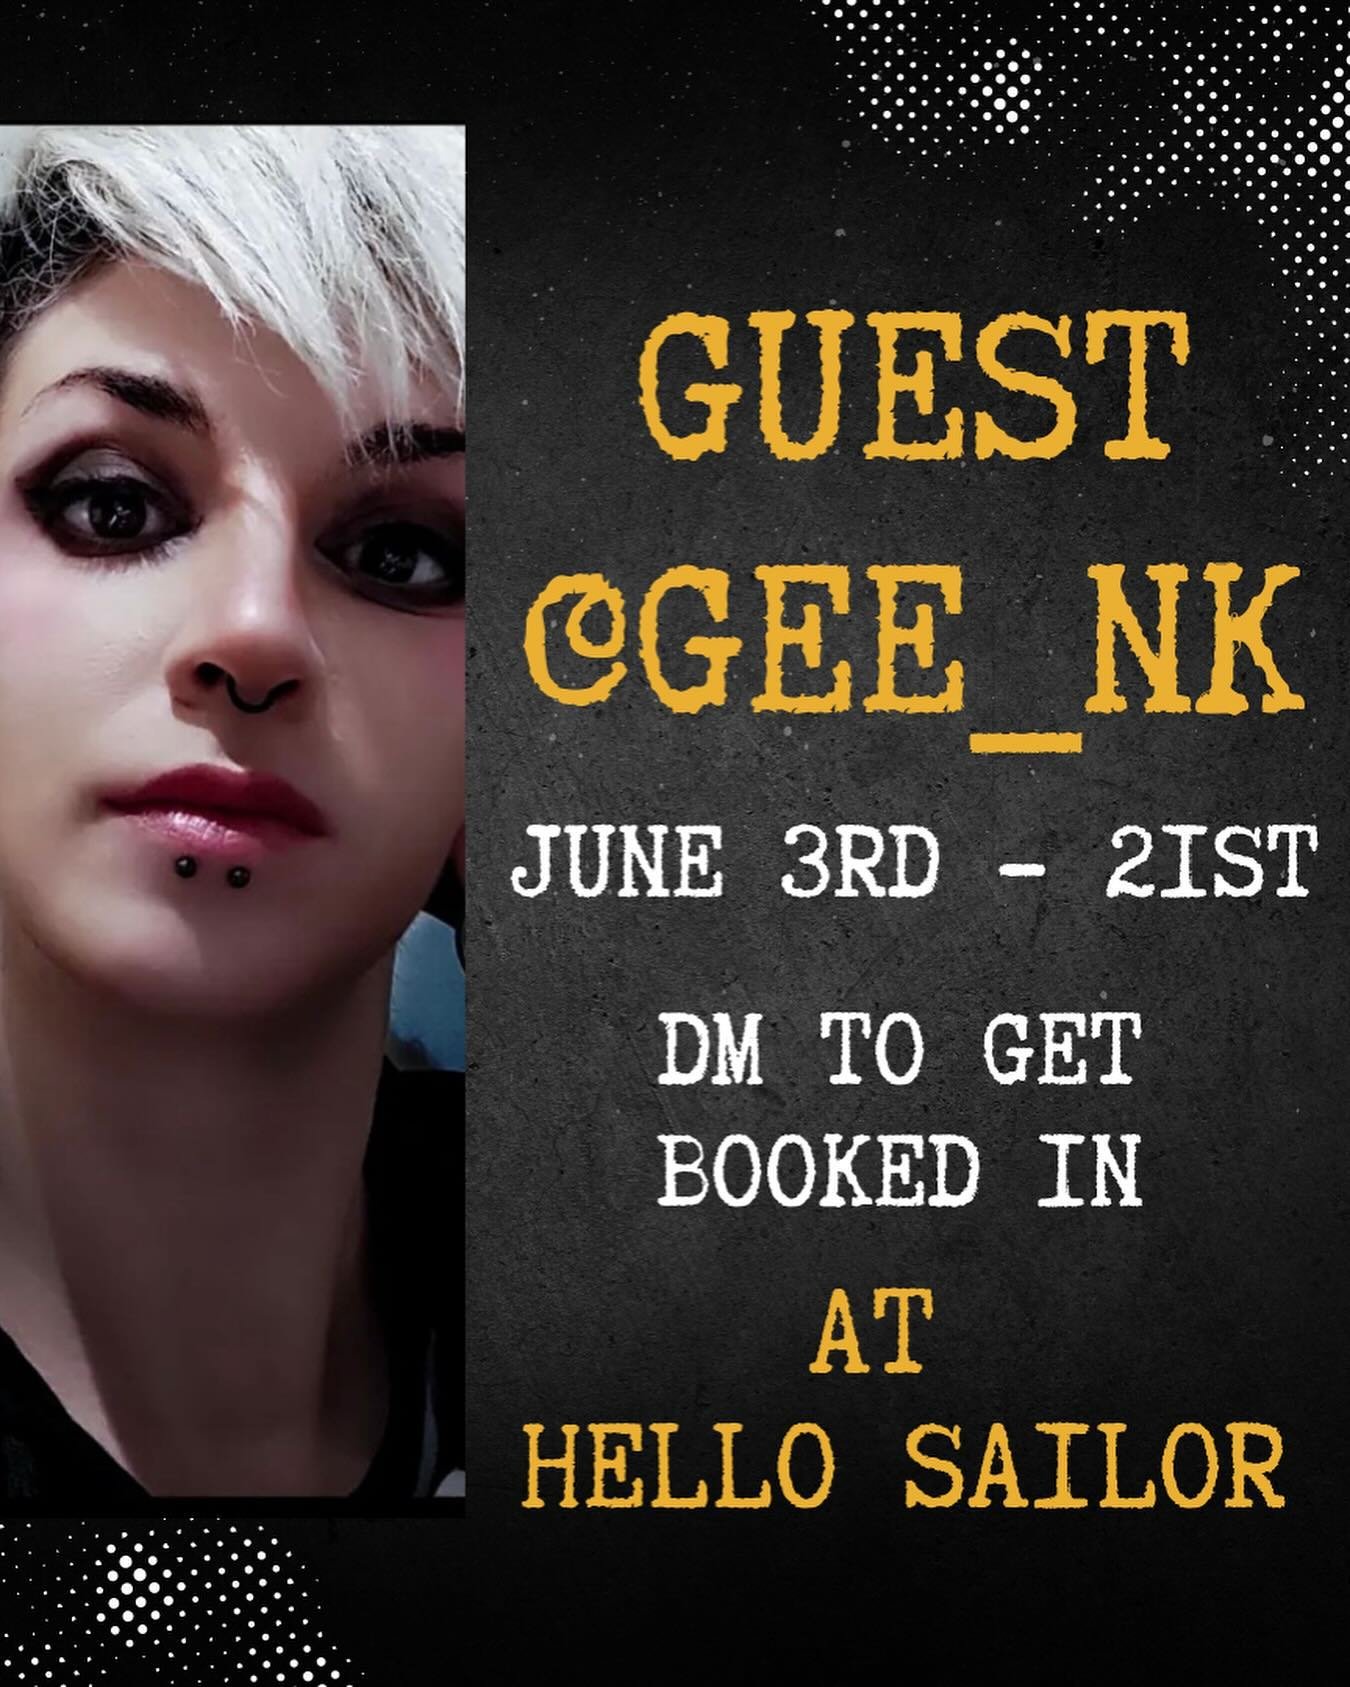 We are excited to announce that @gee_nk is back with us from June 3rd to the 21st! 

Gee specialises in colour work, swipe to see her incredible tattoos and get in touch to book in! Spots won&rsquo;t last long&hellip;.

#colourtattoo #colourwork #new